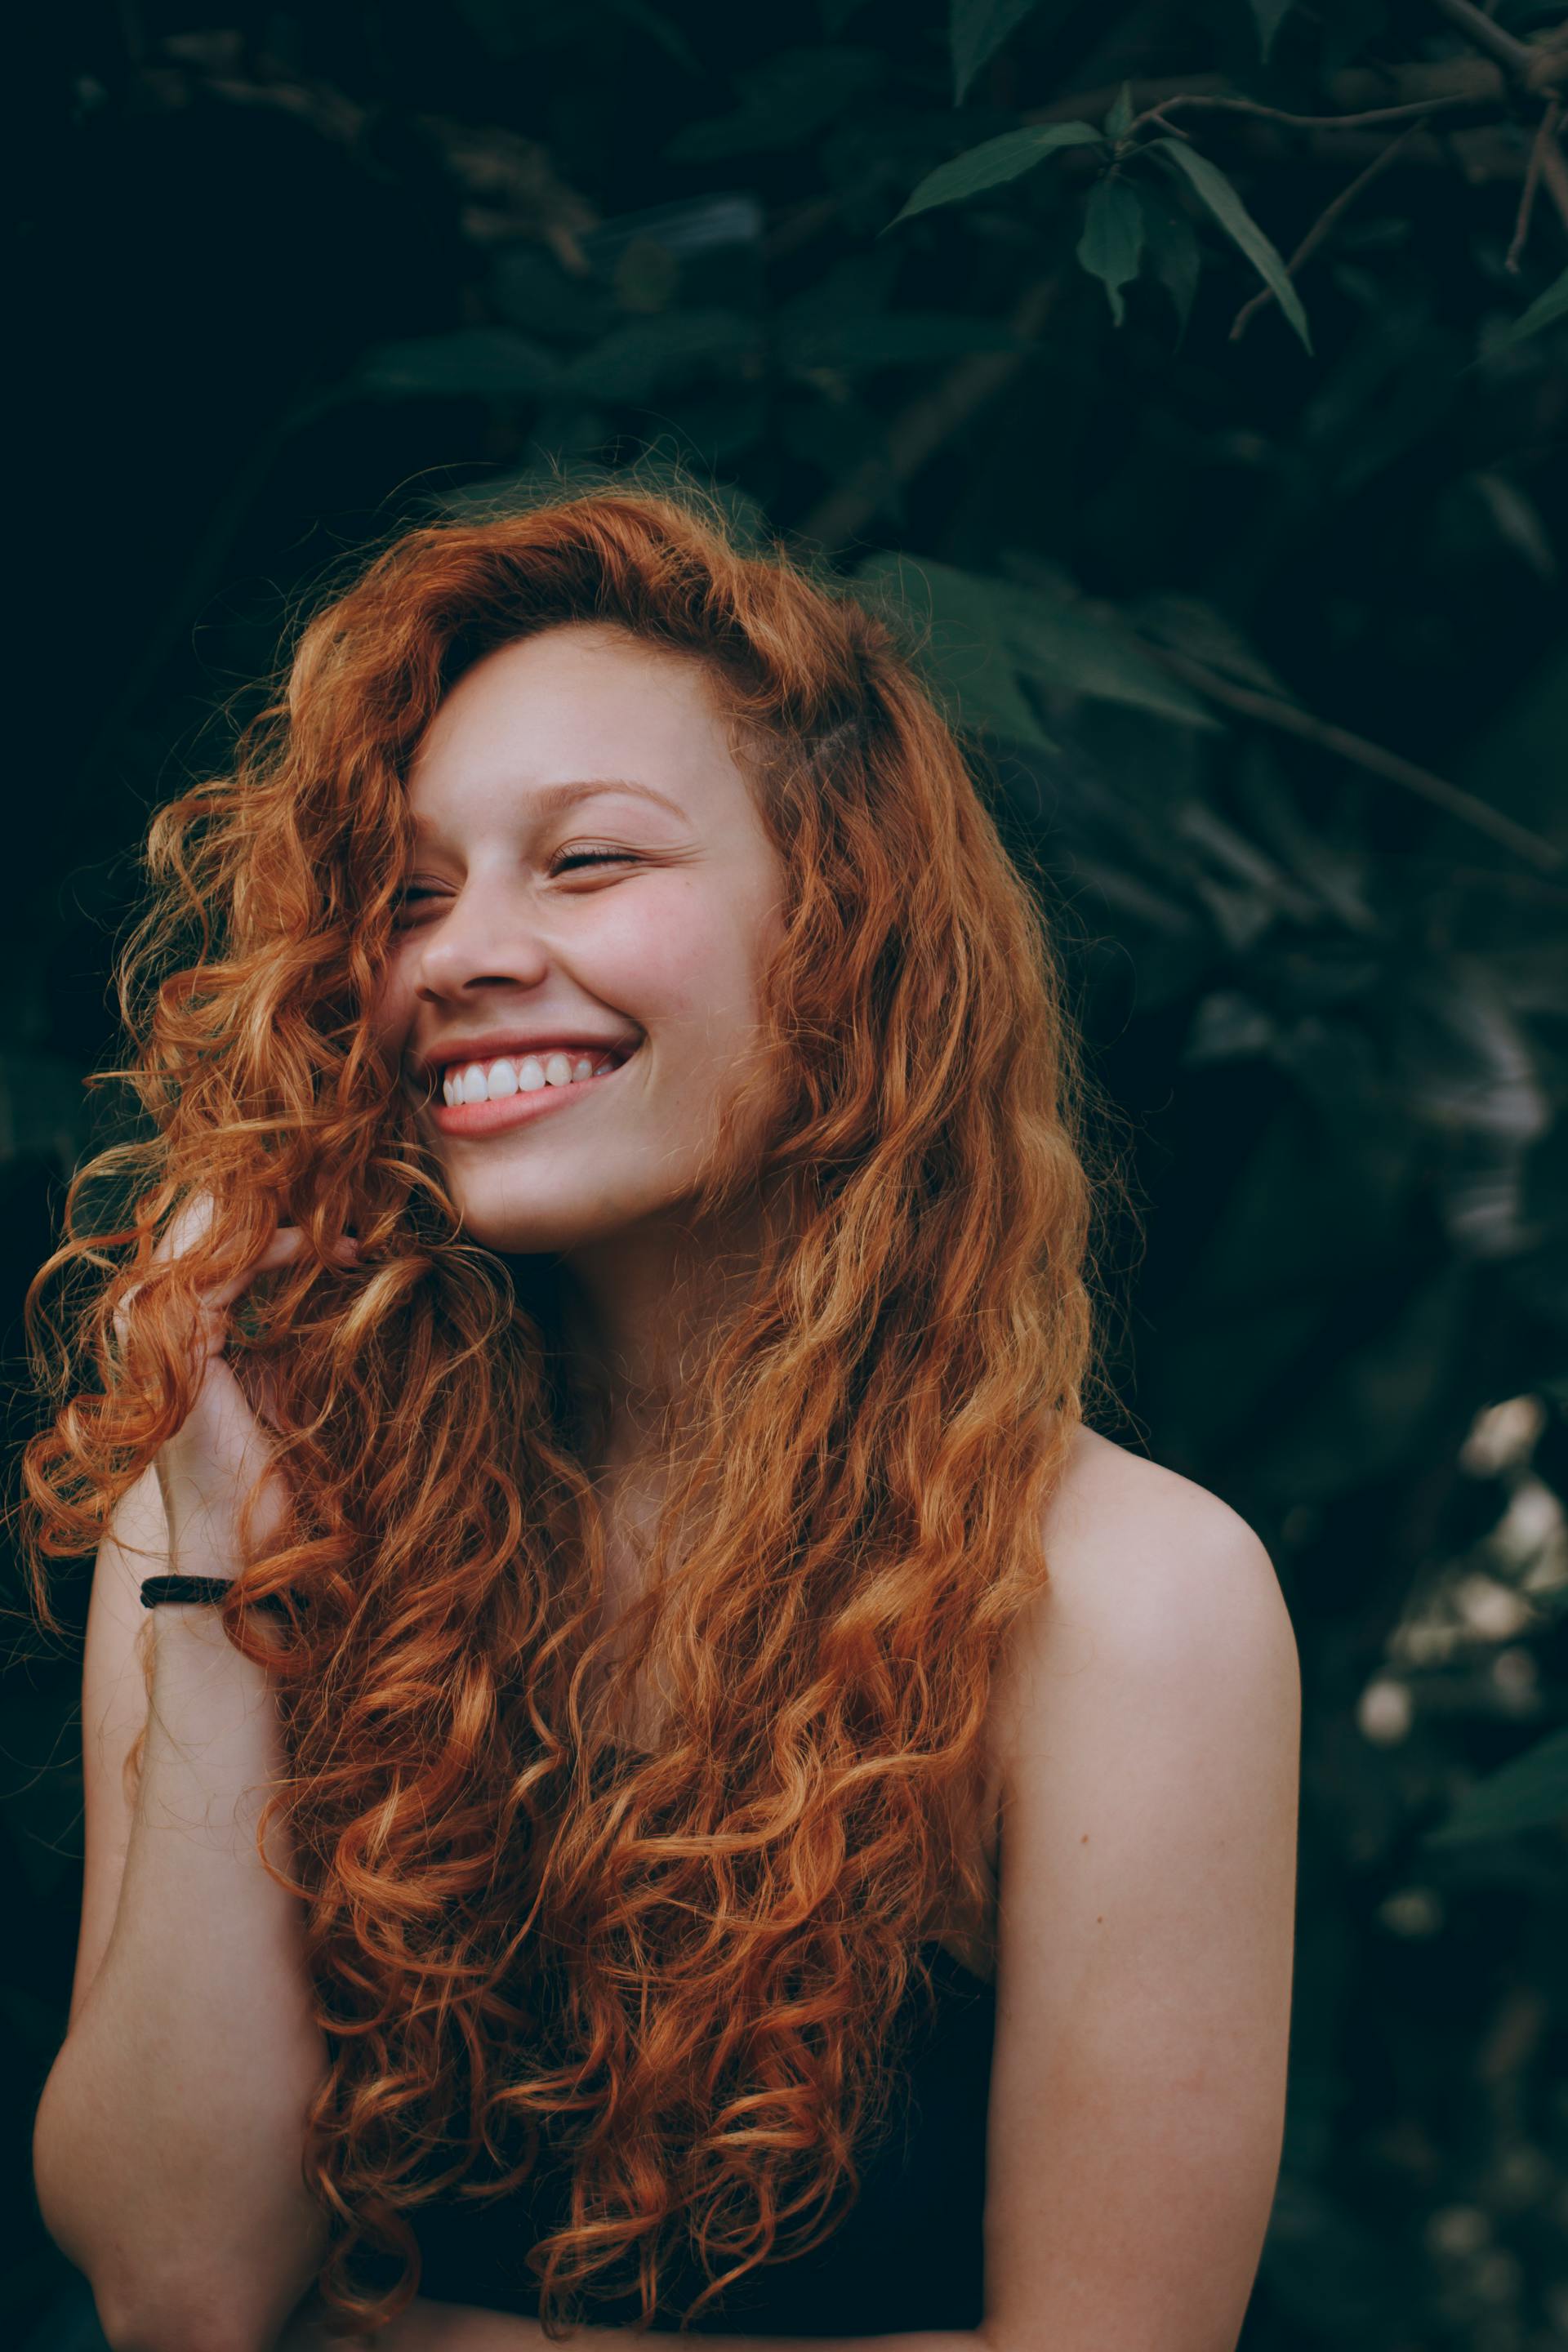 A smiling woman with red hair | Source: Pexels